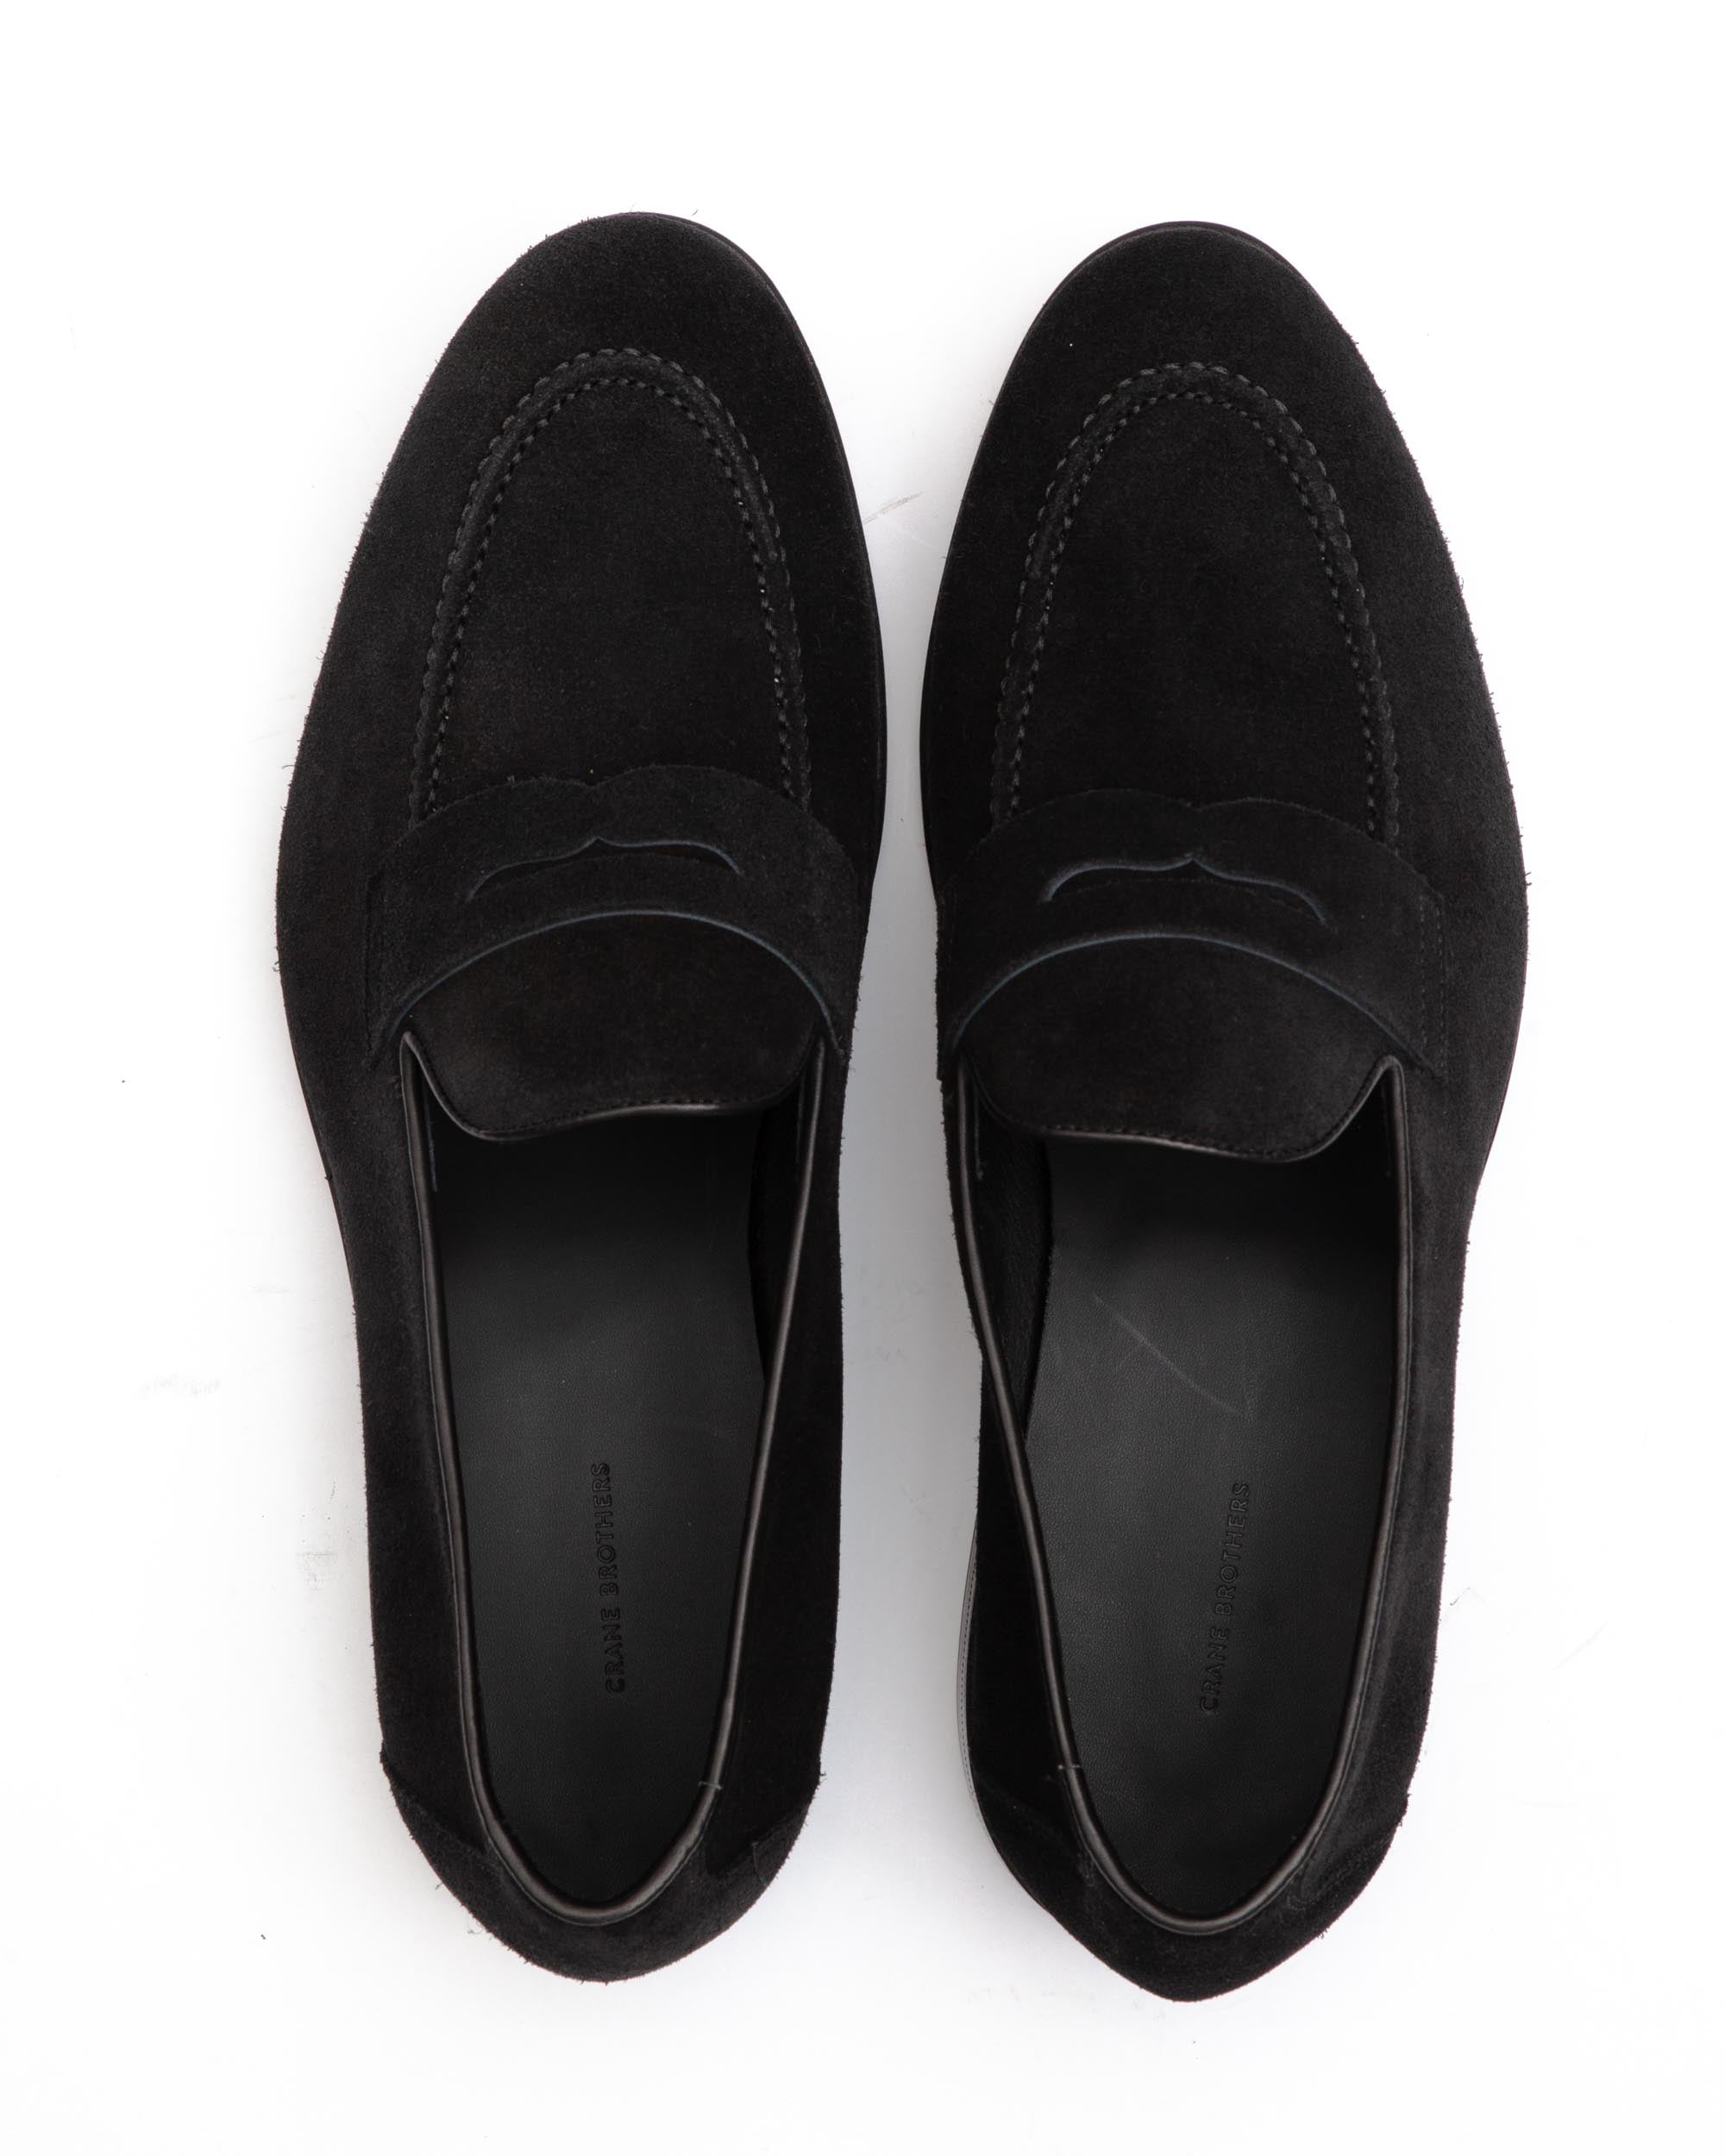 Black Suede Sole Penny Loafer